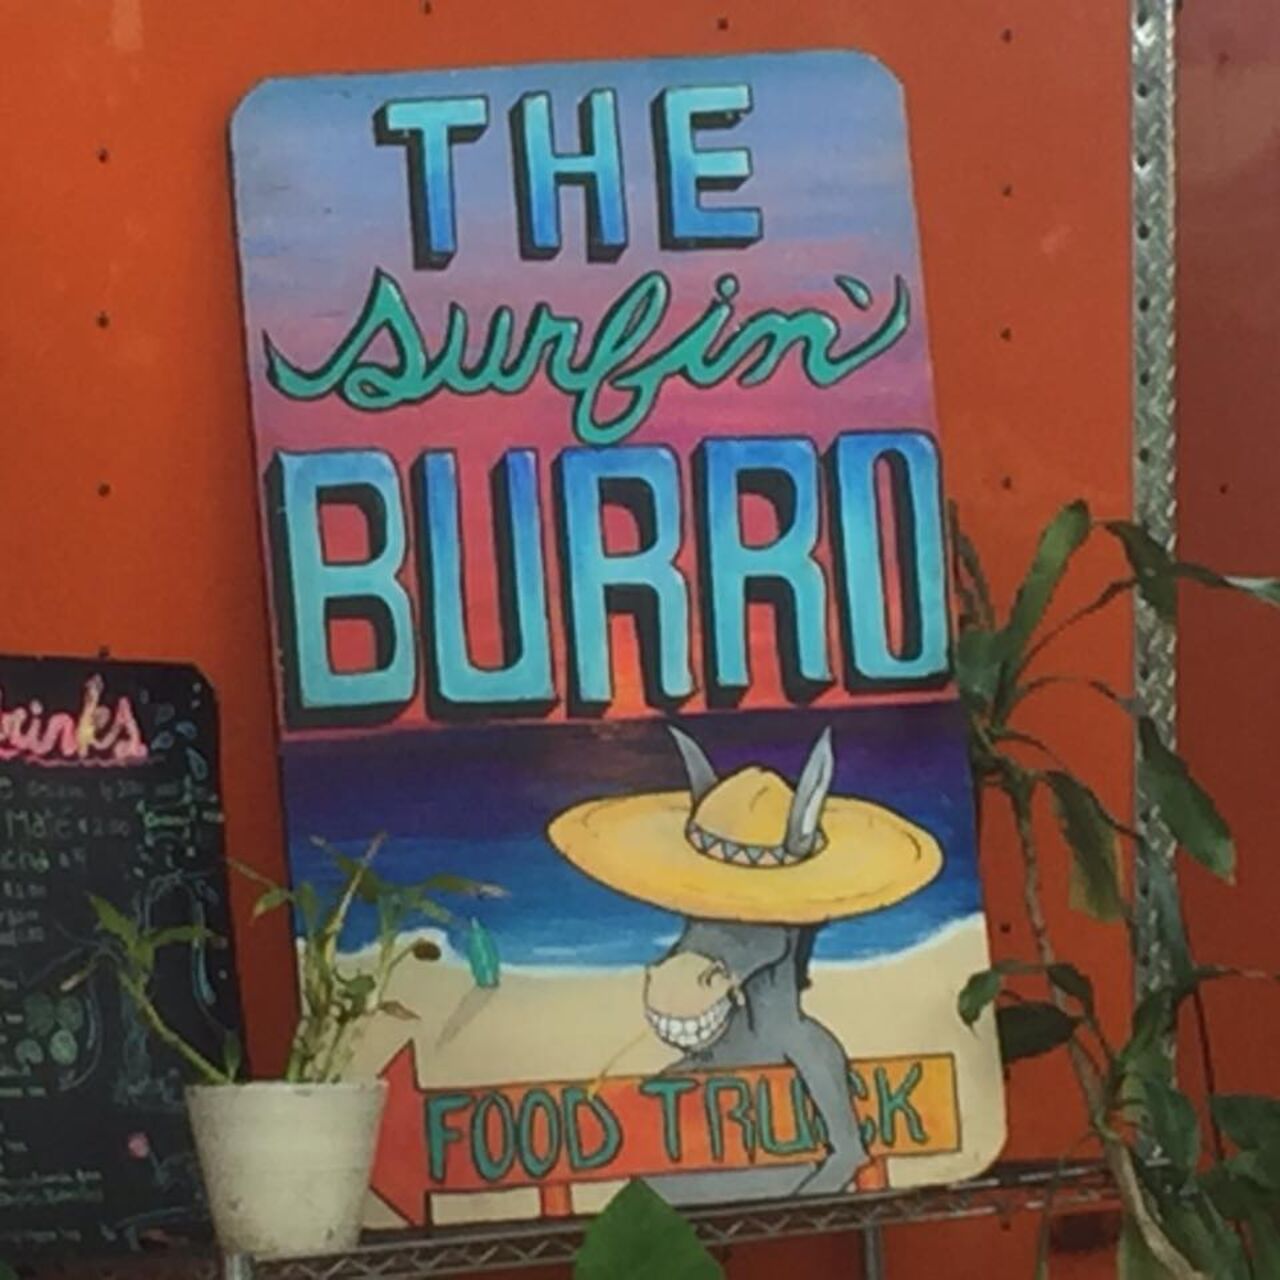 A photo of The Surfing Burro